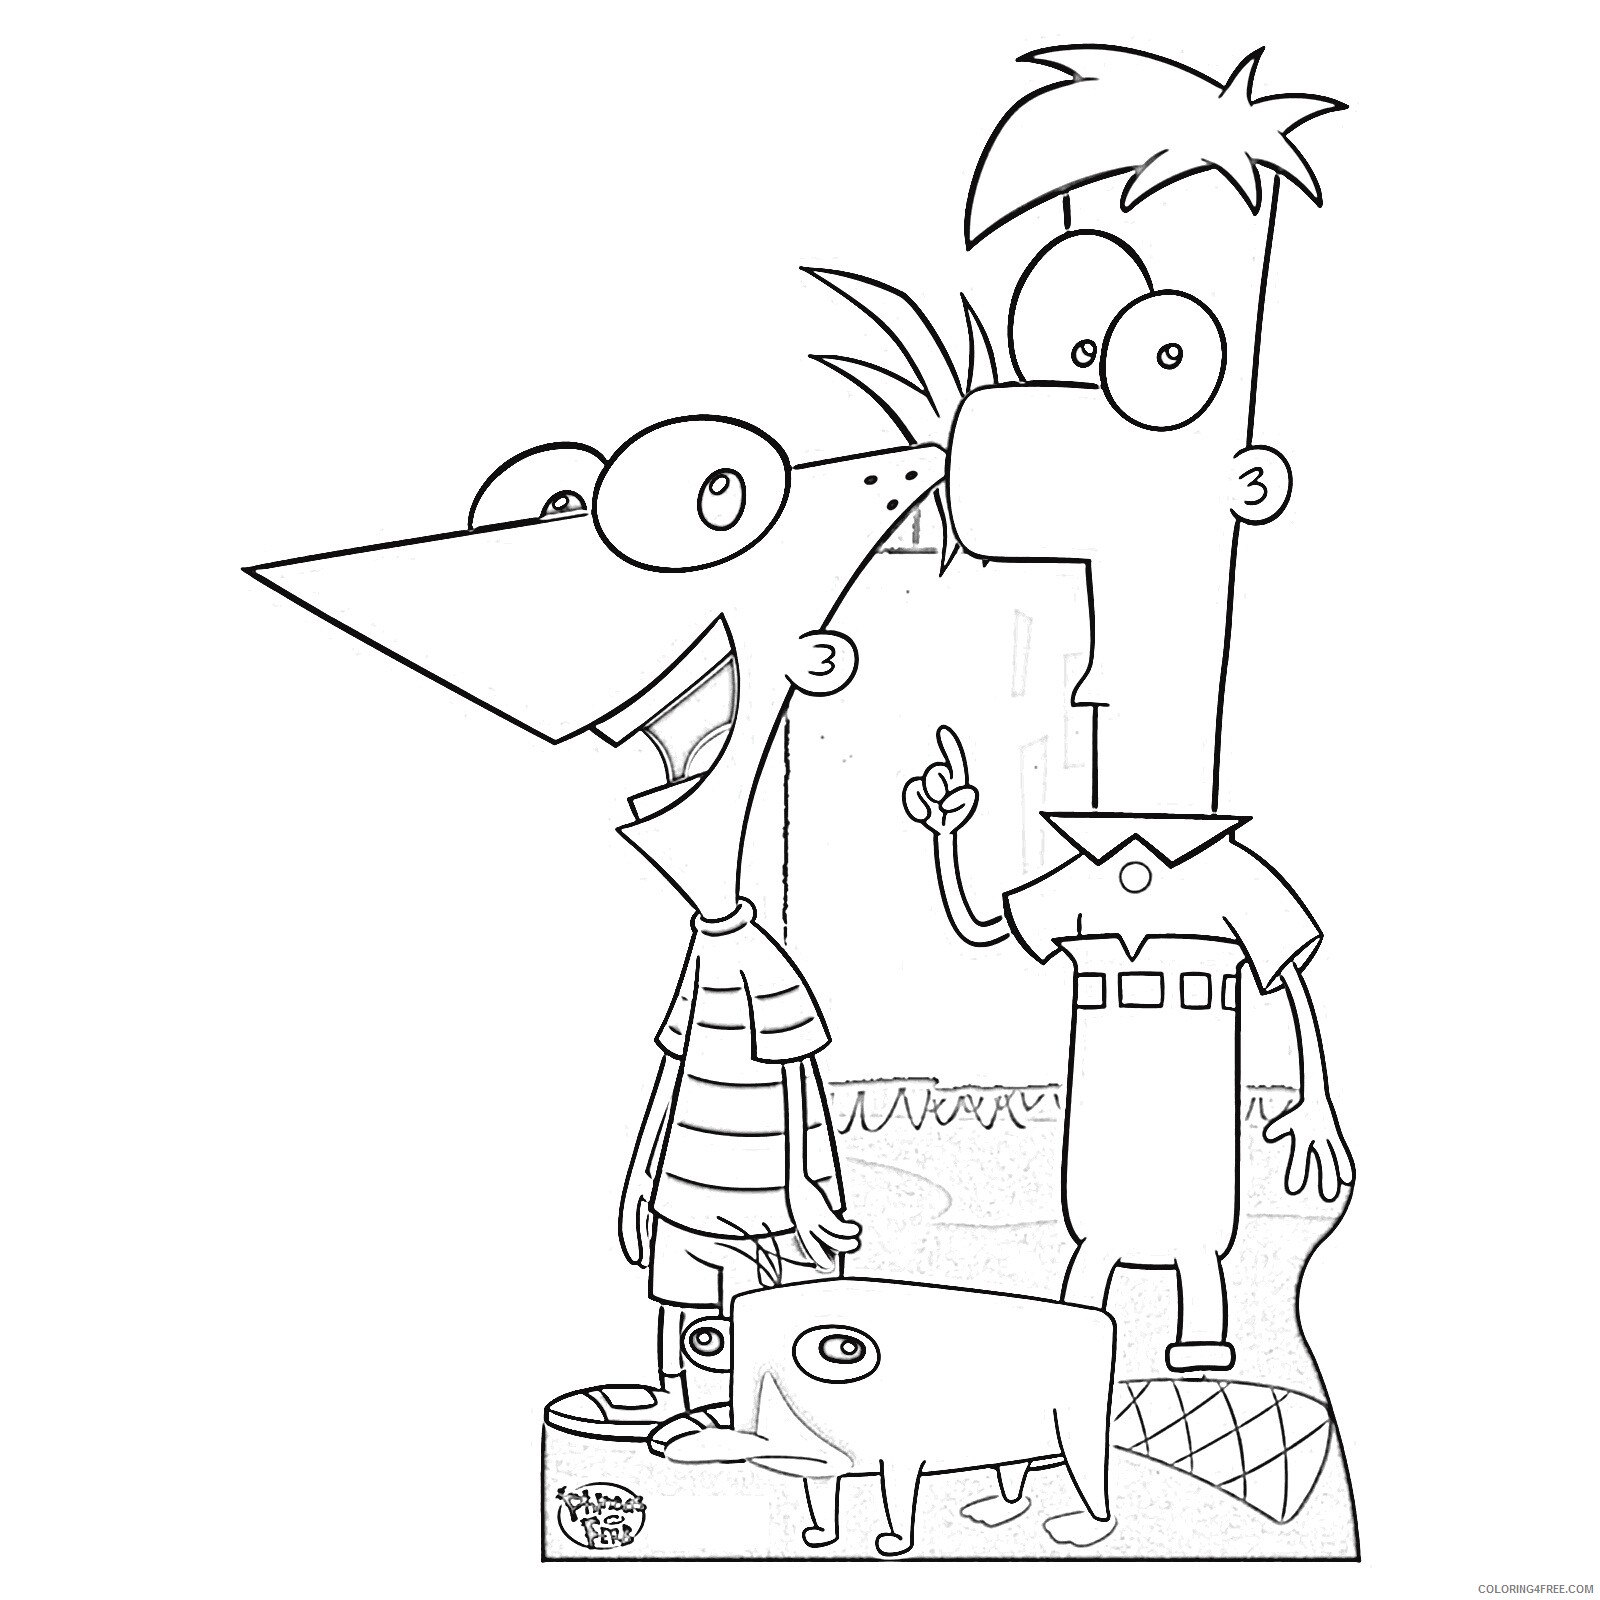 Phineas and Ferb Coloring Pages TV Film Phineas and Ferb Printable 2020 06226 Coloring4free